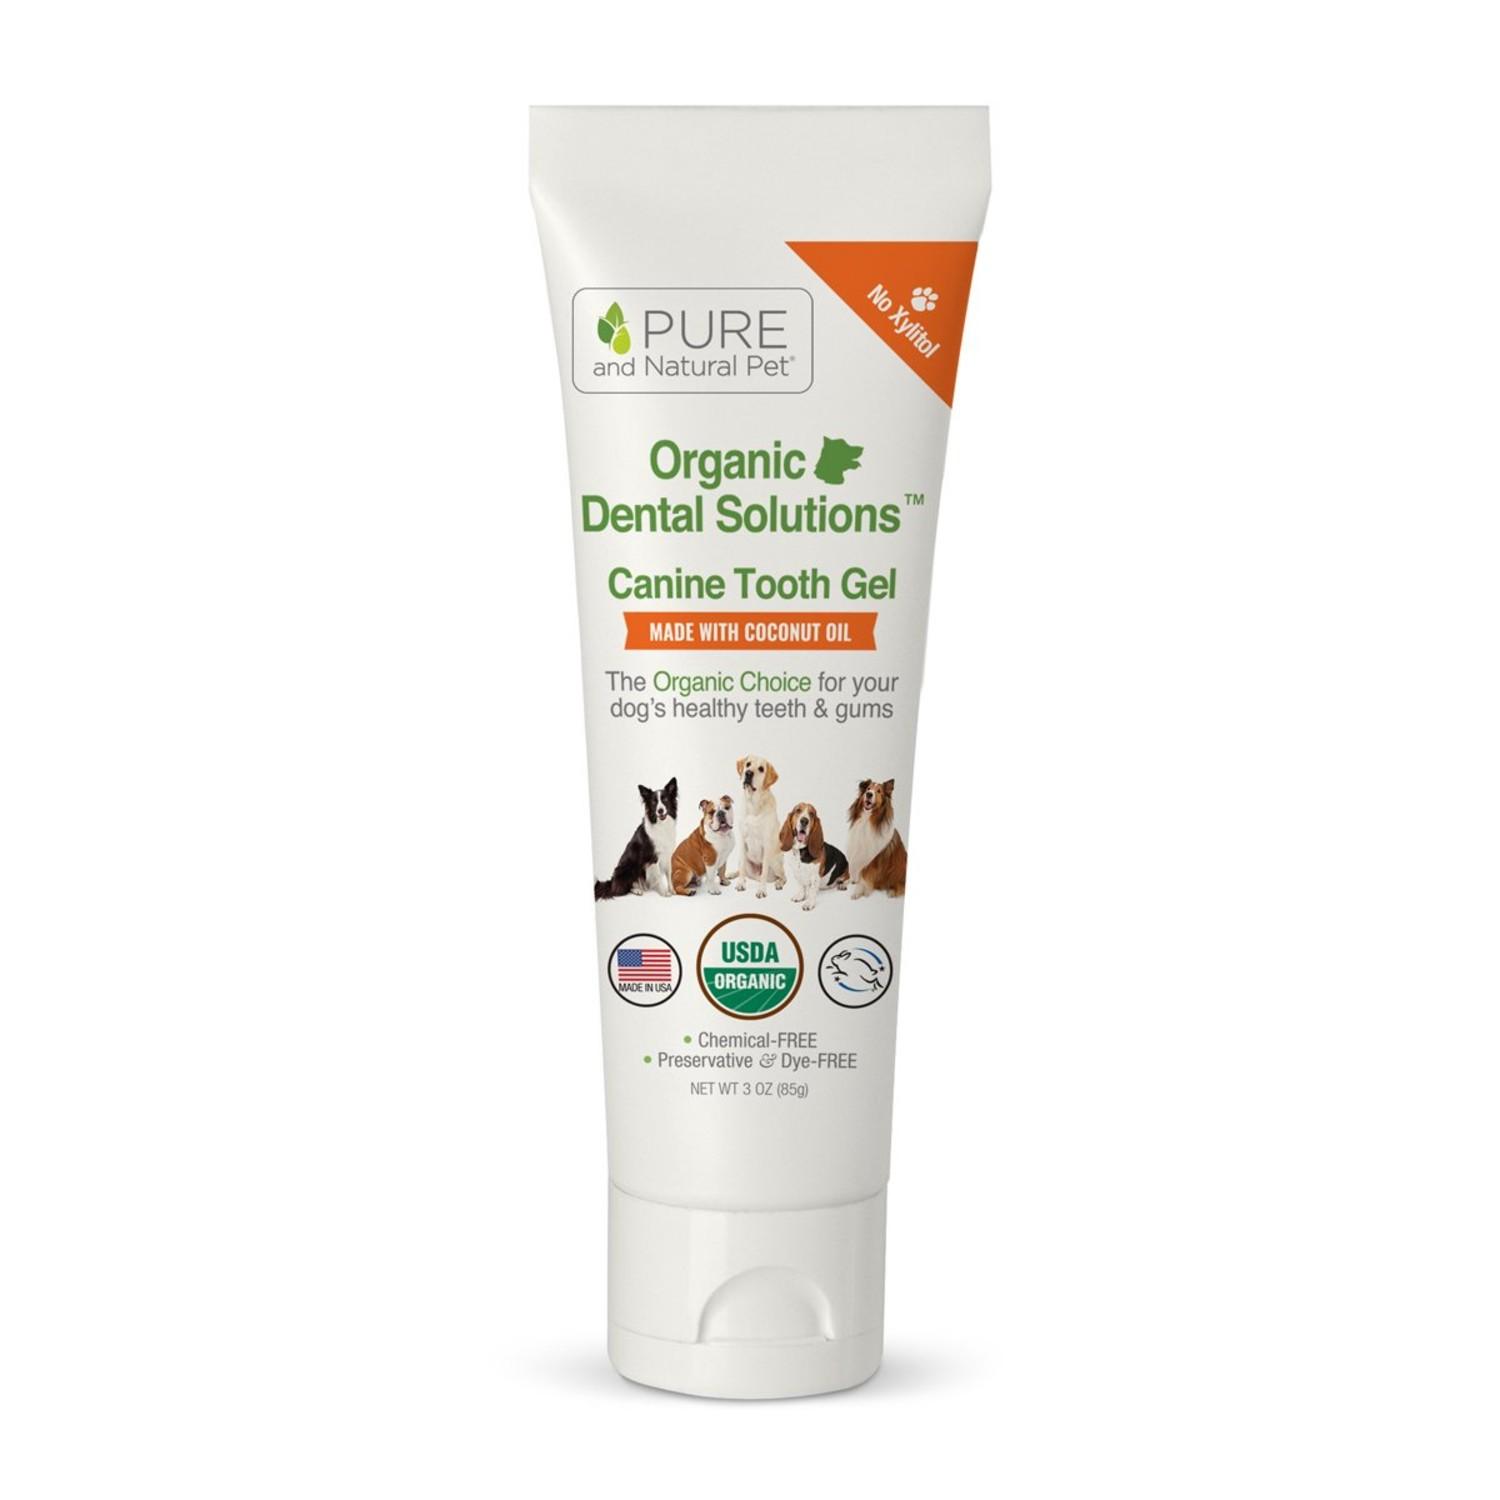 Pure and Natural Pet Organic Dental Solutions Canine Tooth Gel